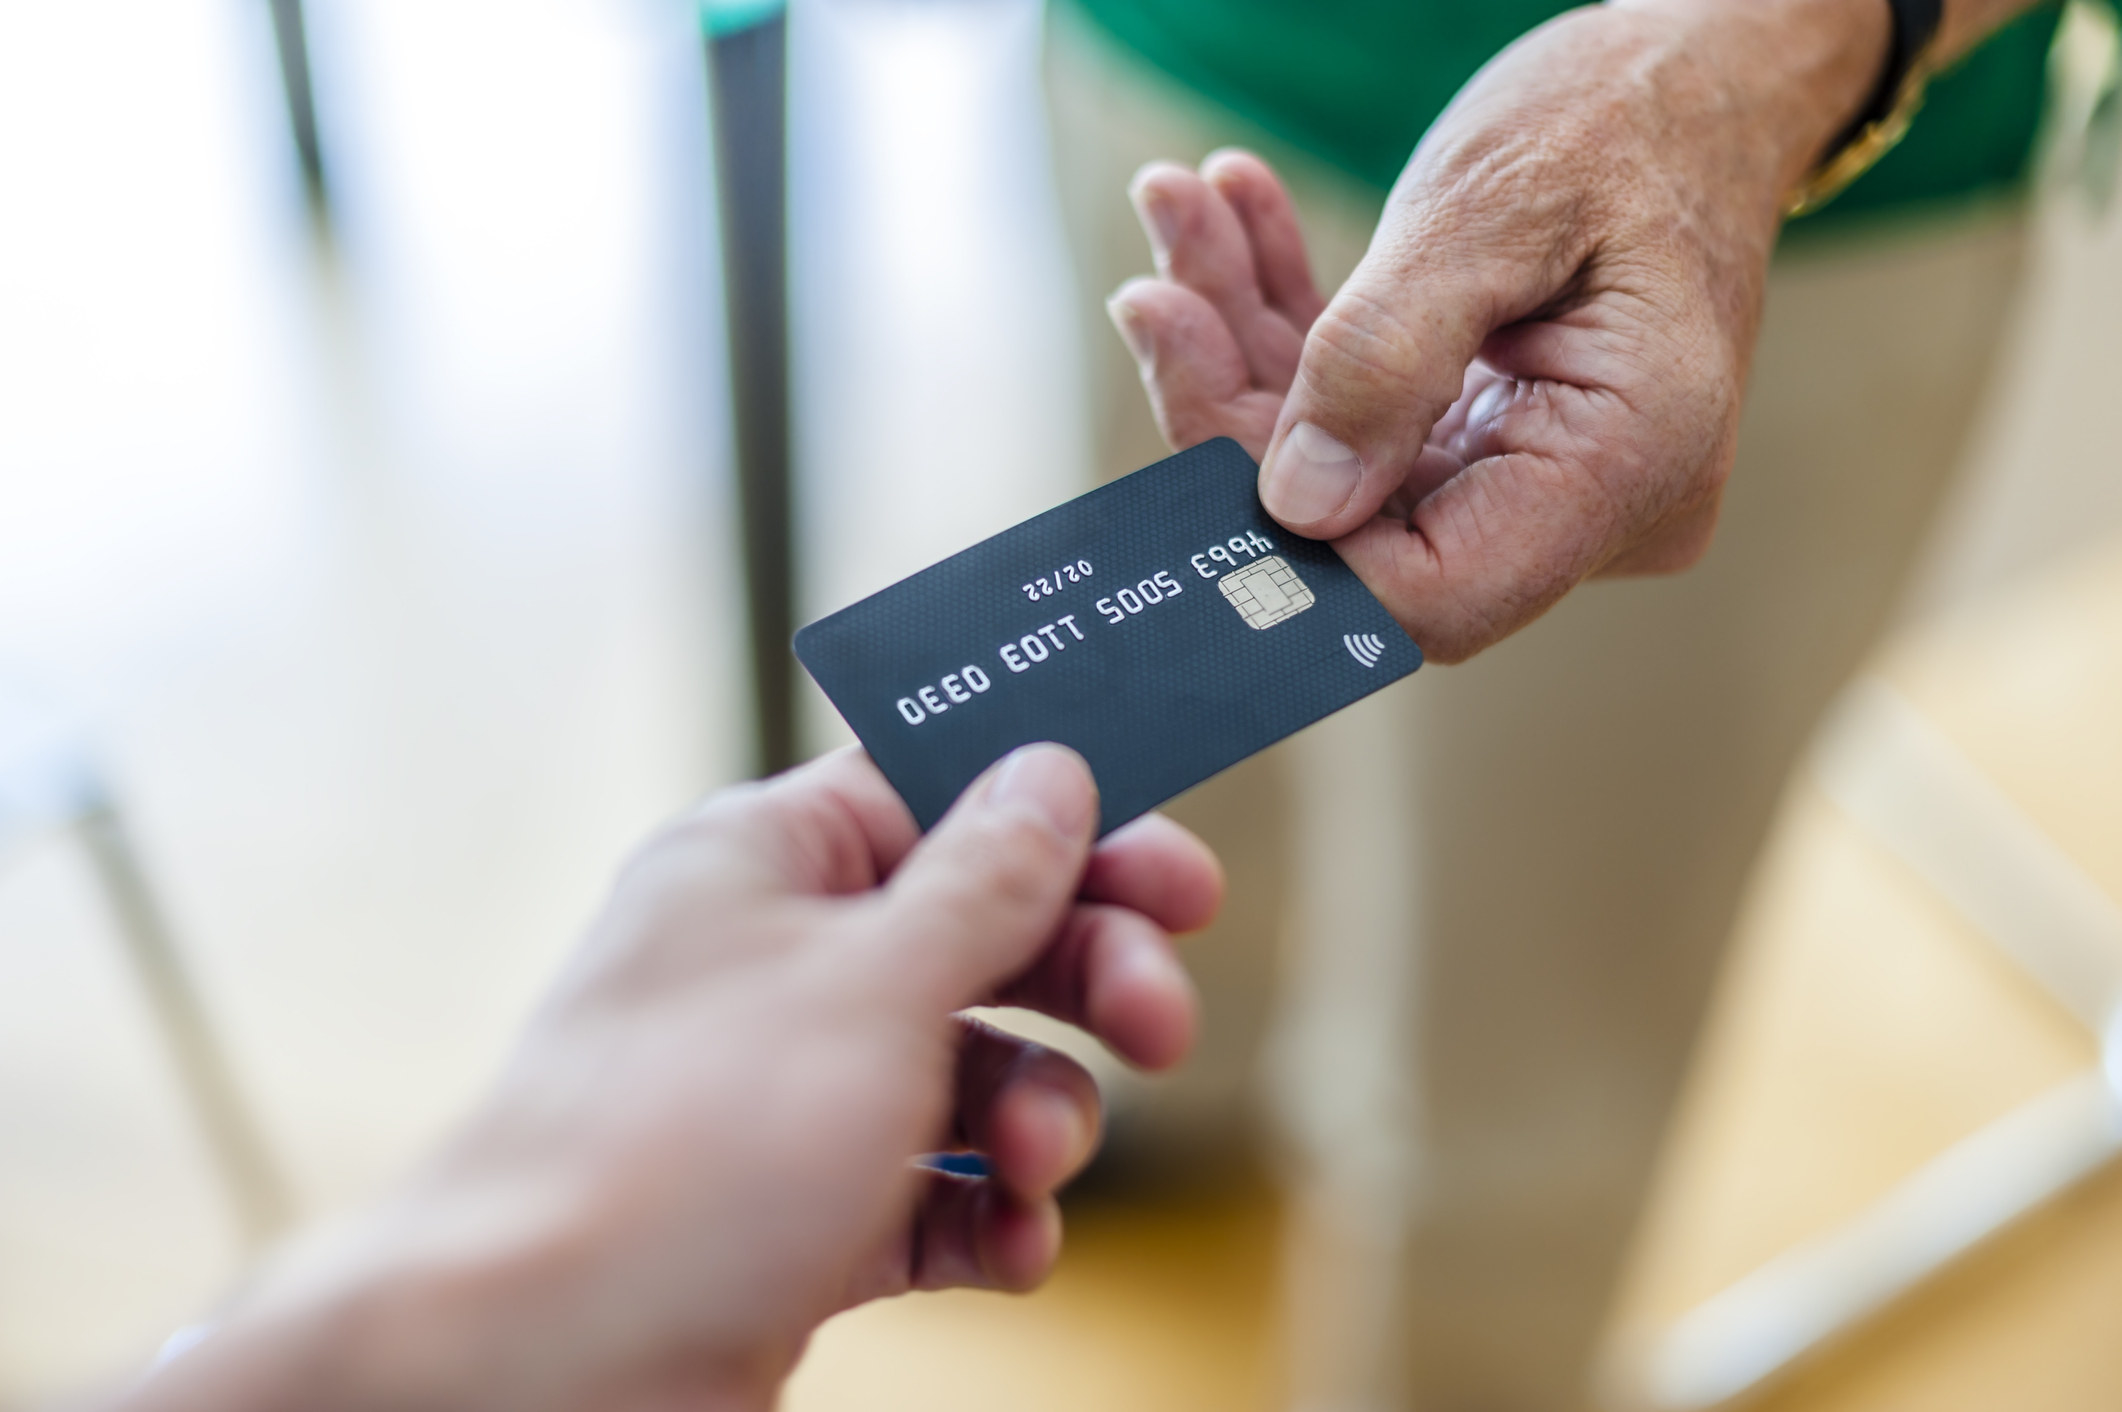 One person hands a credit card to another person&#x27;s outstretched hand